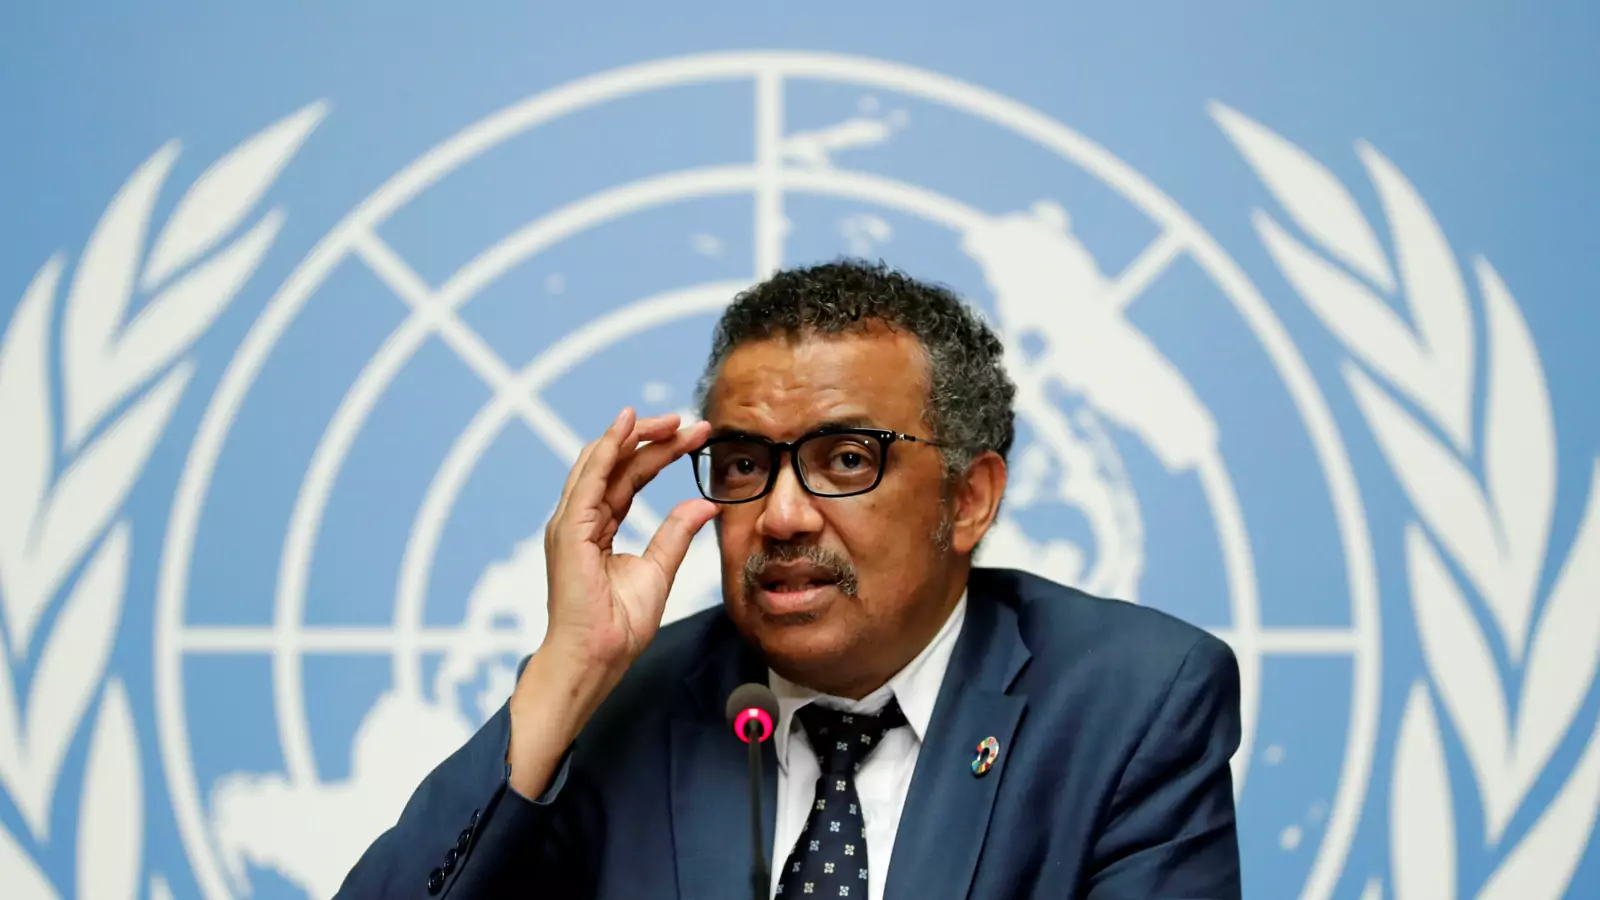 A Scorecard for Dr. Tedros as the WHO's Director-General | Council ...